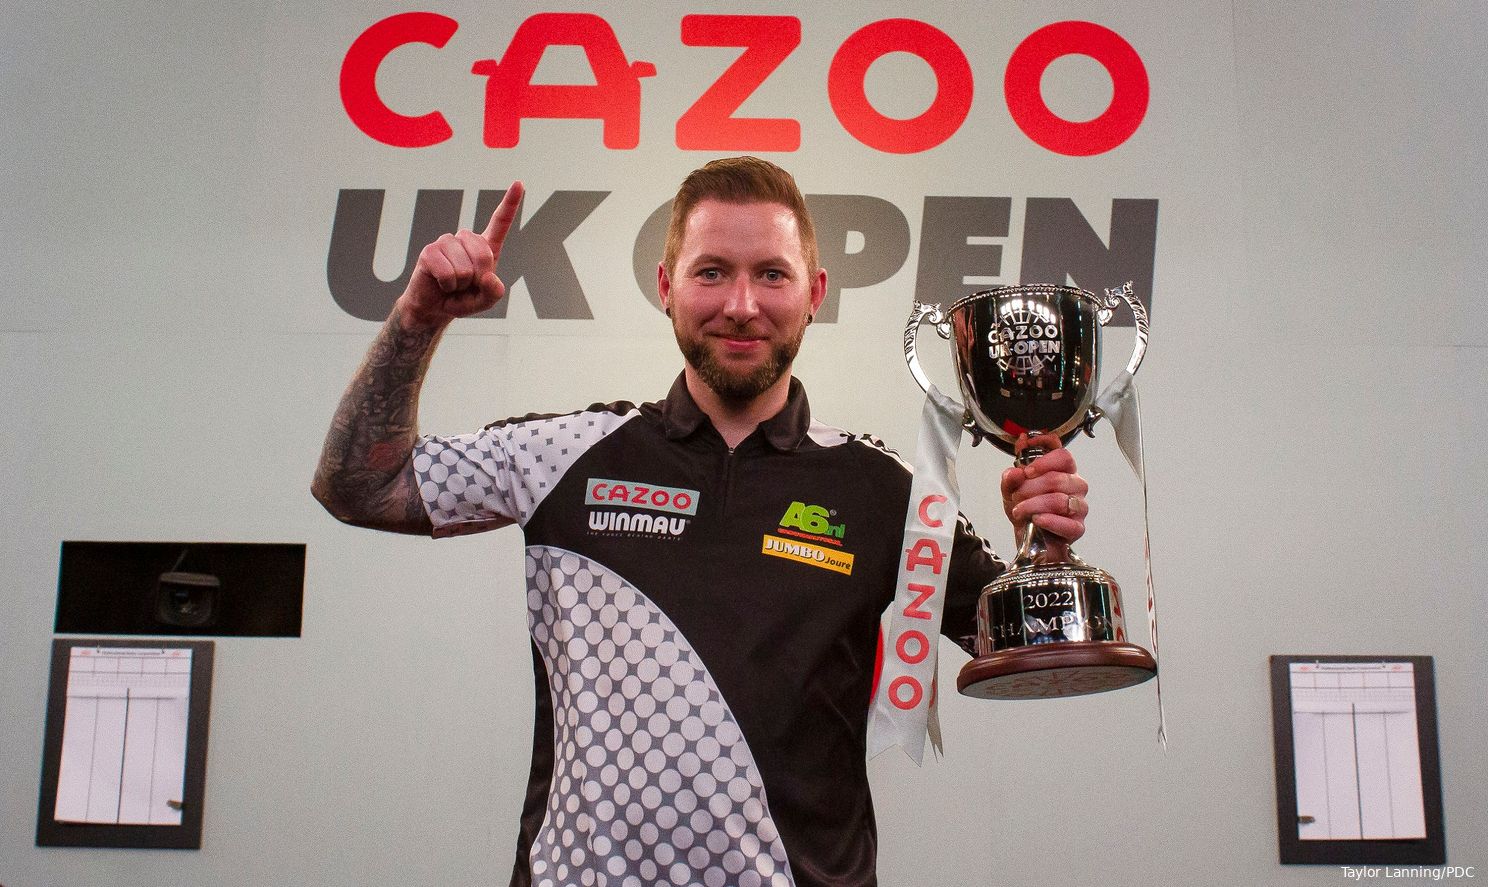 The latest news about the UK Open